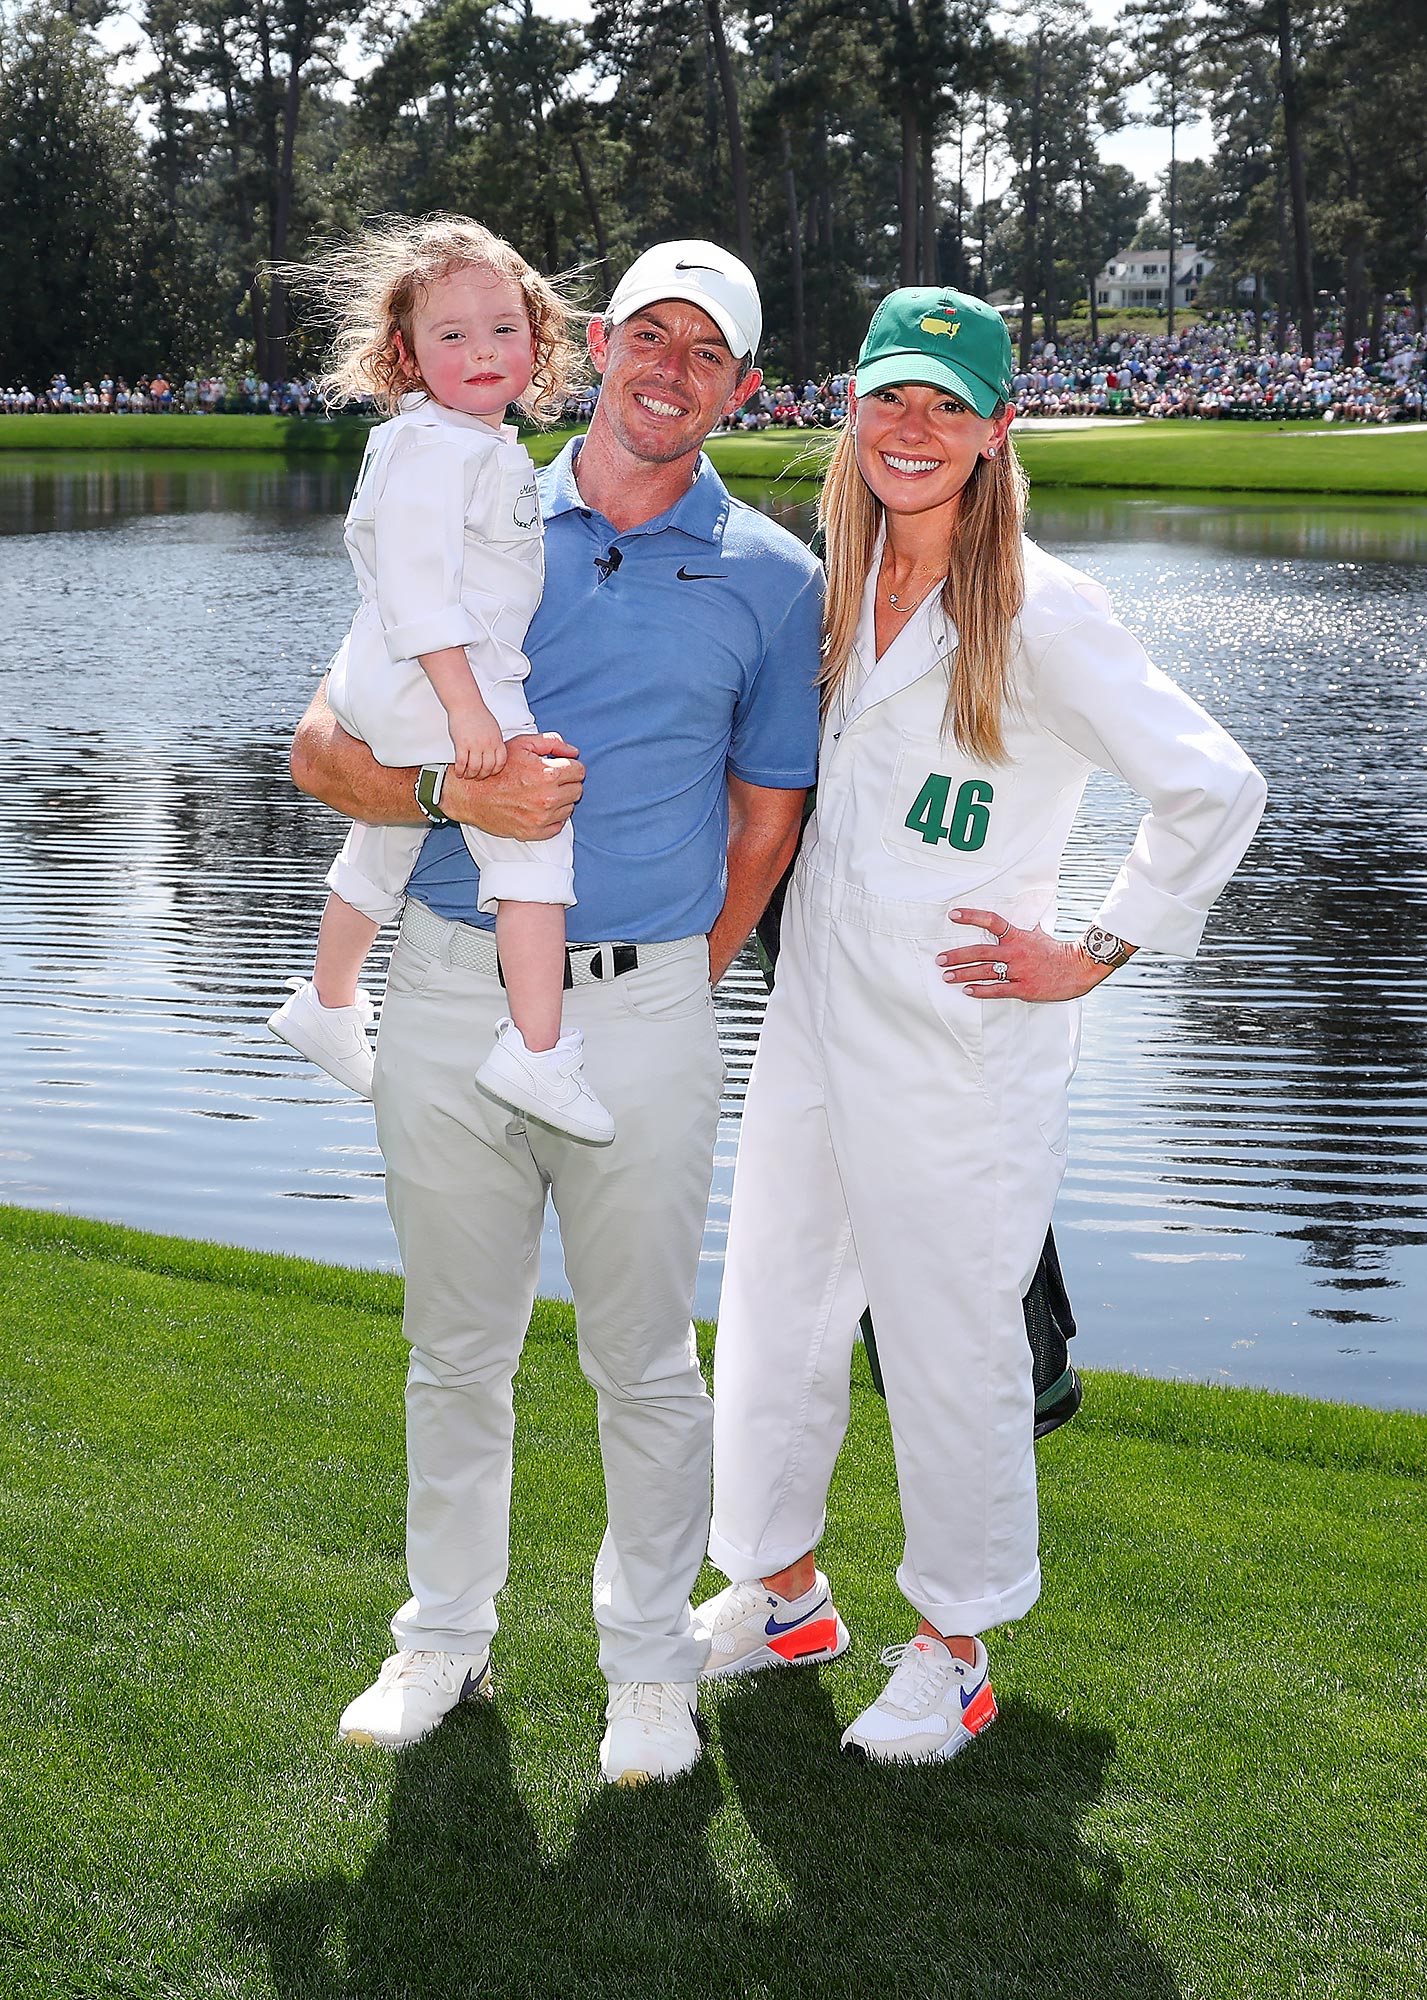 Erica Stoll Spotted for 1st Time Since Rory McIlroy Filed for Divorce